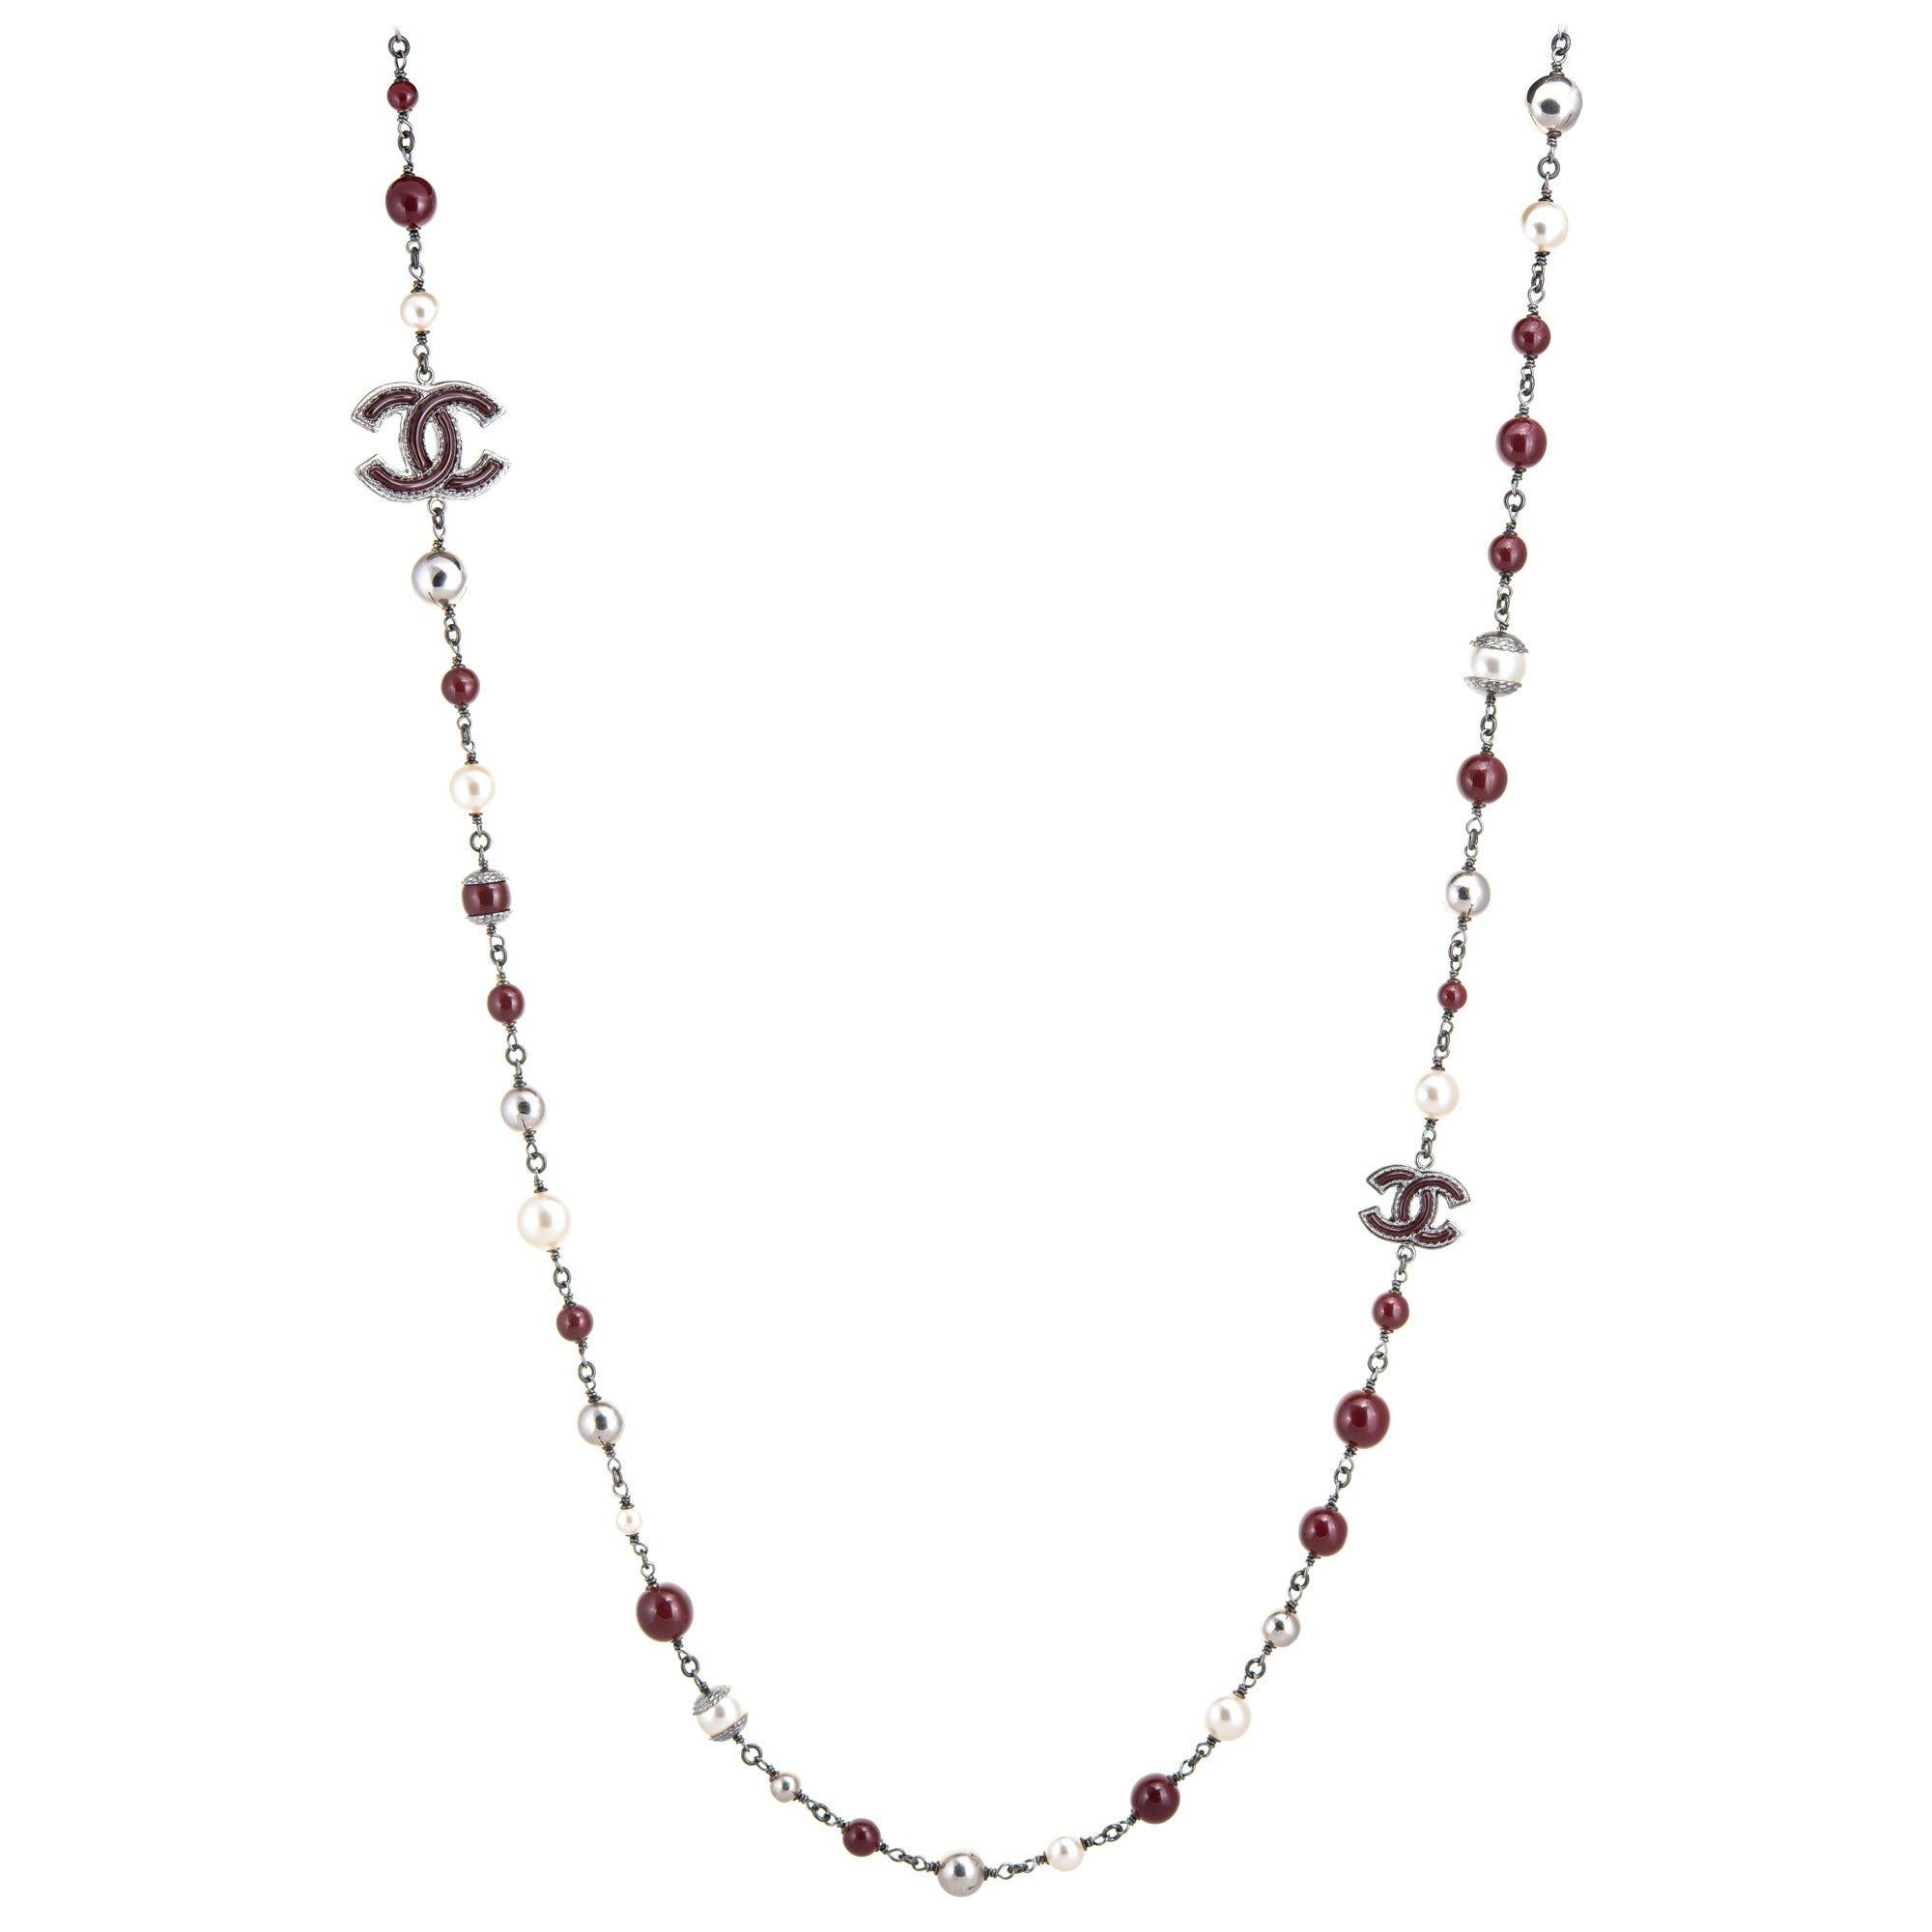 Chanel Faux White Pearl Maroon Bead Necklace Graduated Long 47" Circa 2014 Belt For Sale